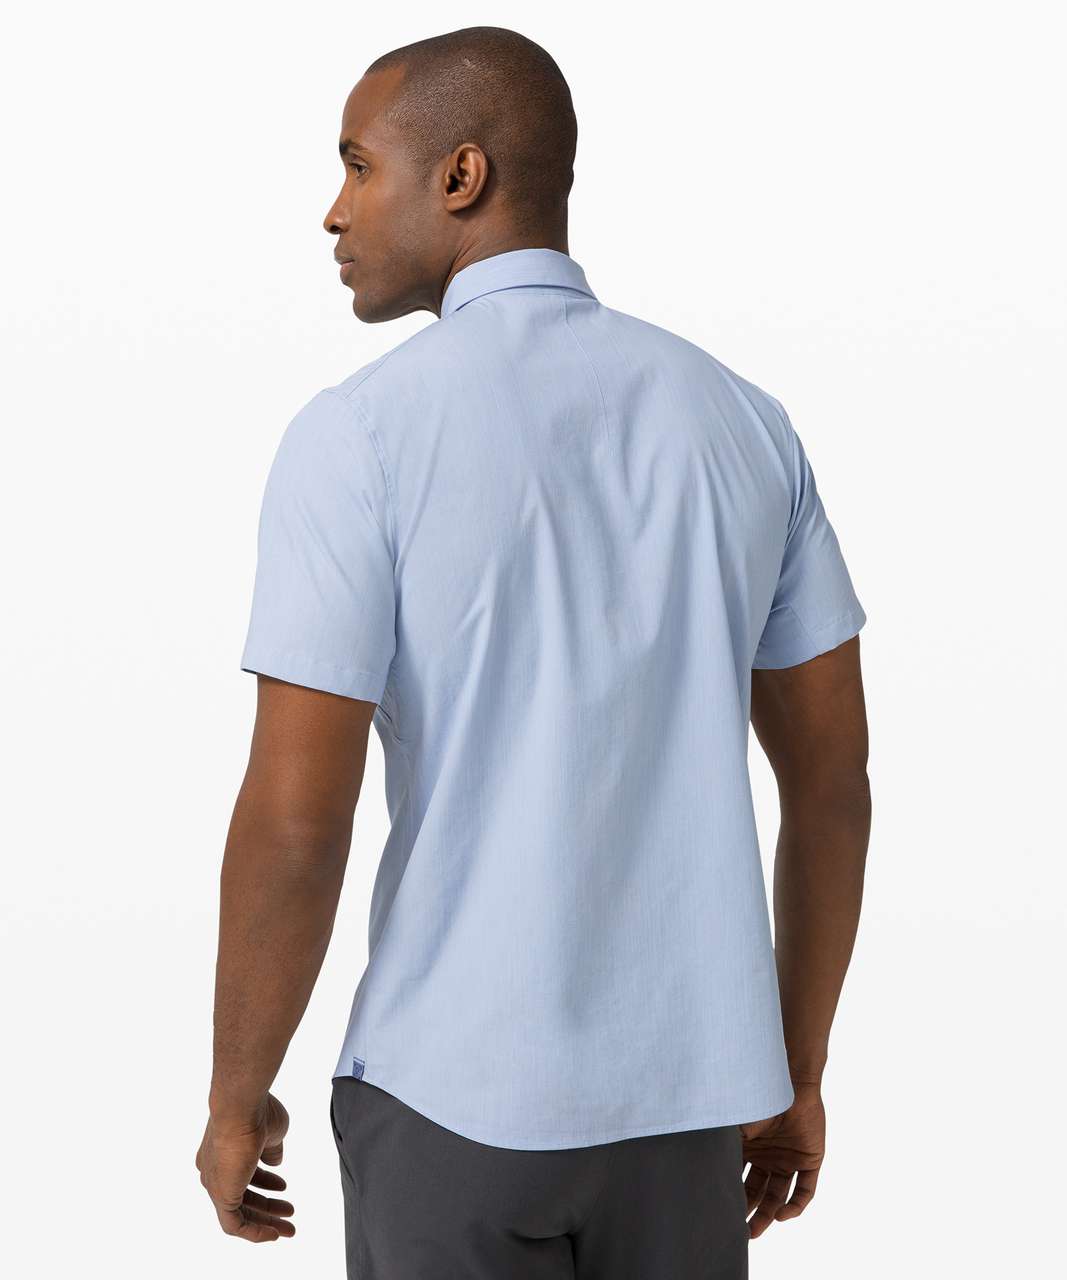 Lululemon Down to the Wire Slim Fit Short Sleeve - Heathered Oasis Blue